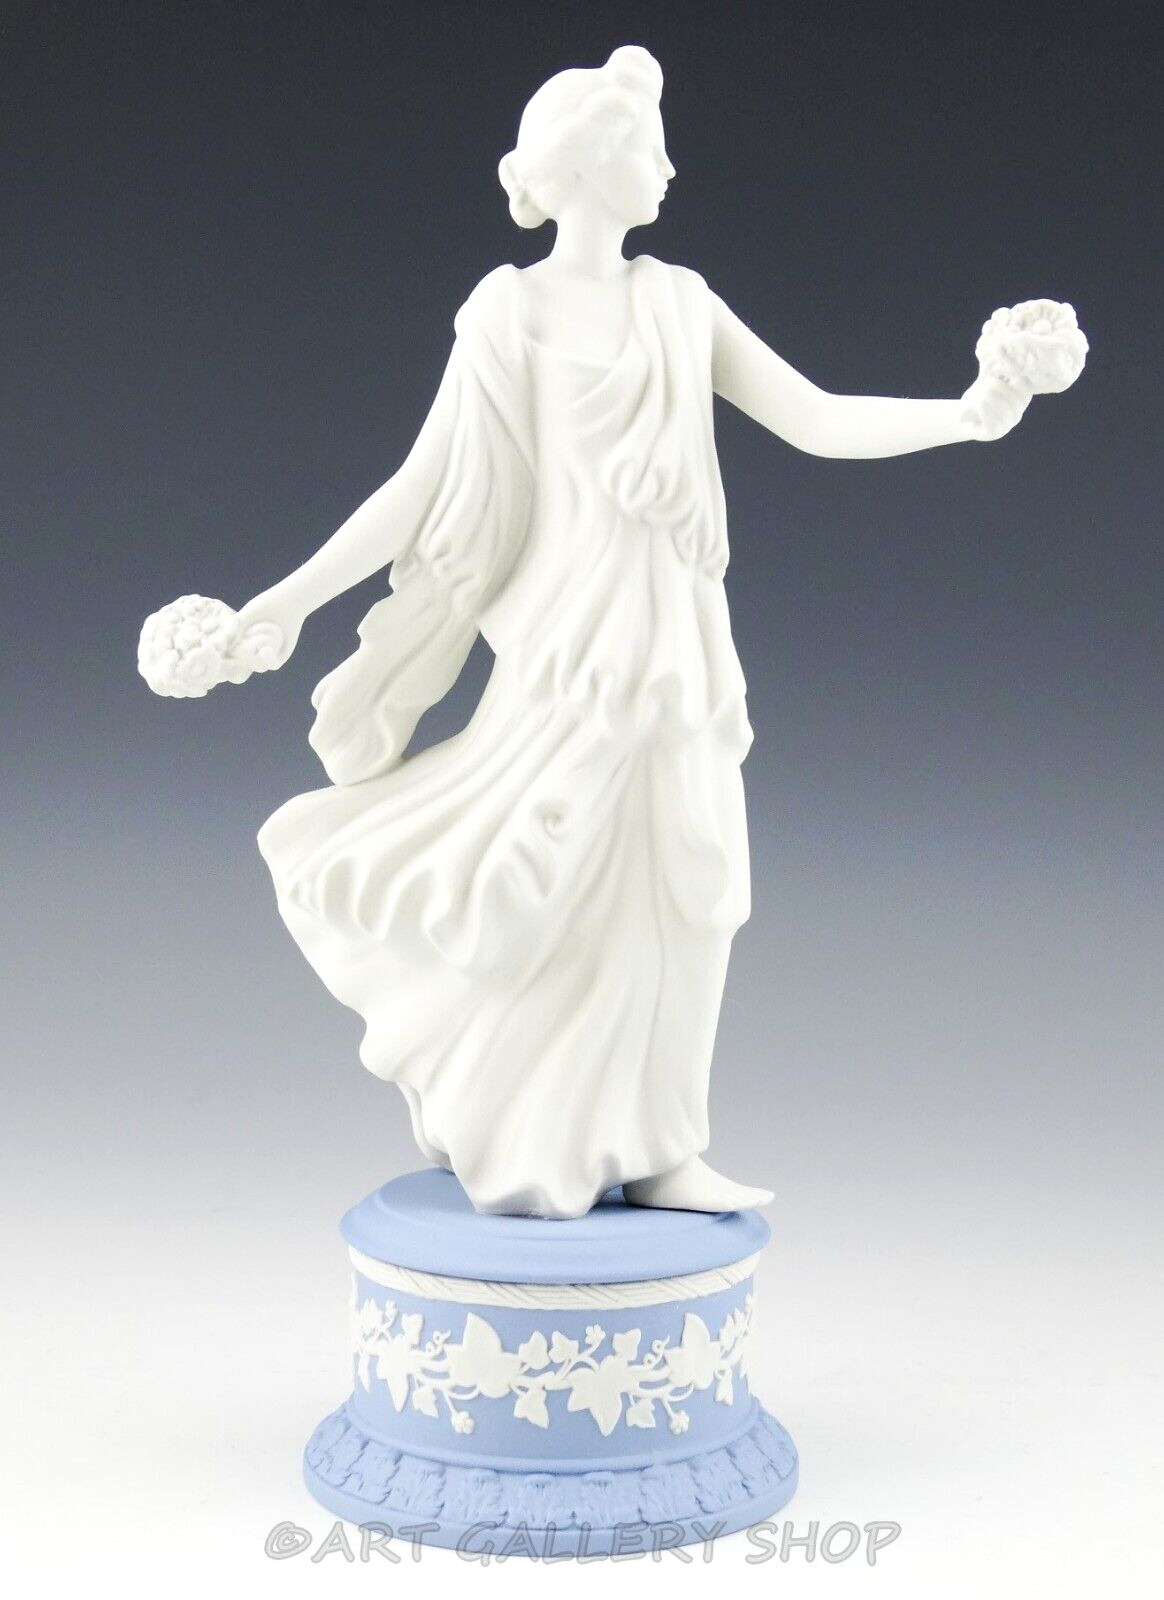 1997 Wedgwood Figurine THE DANCING HOURS FLORAL POSY Limited Ed. By Martin Evans